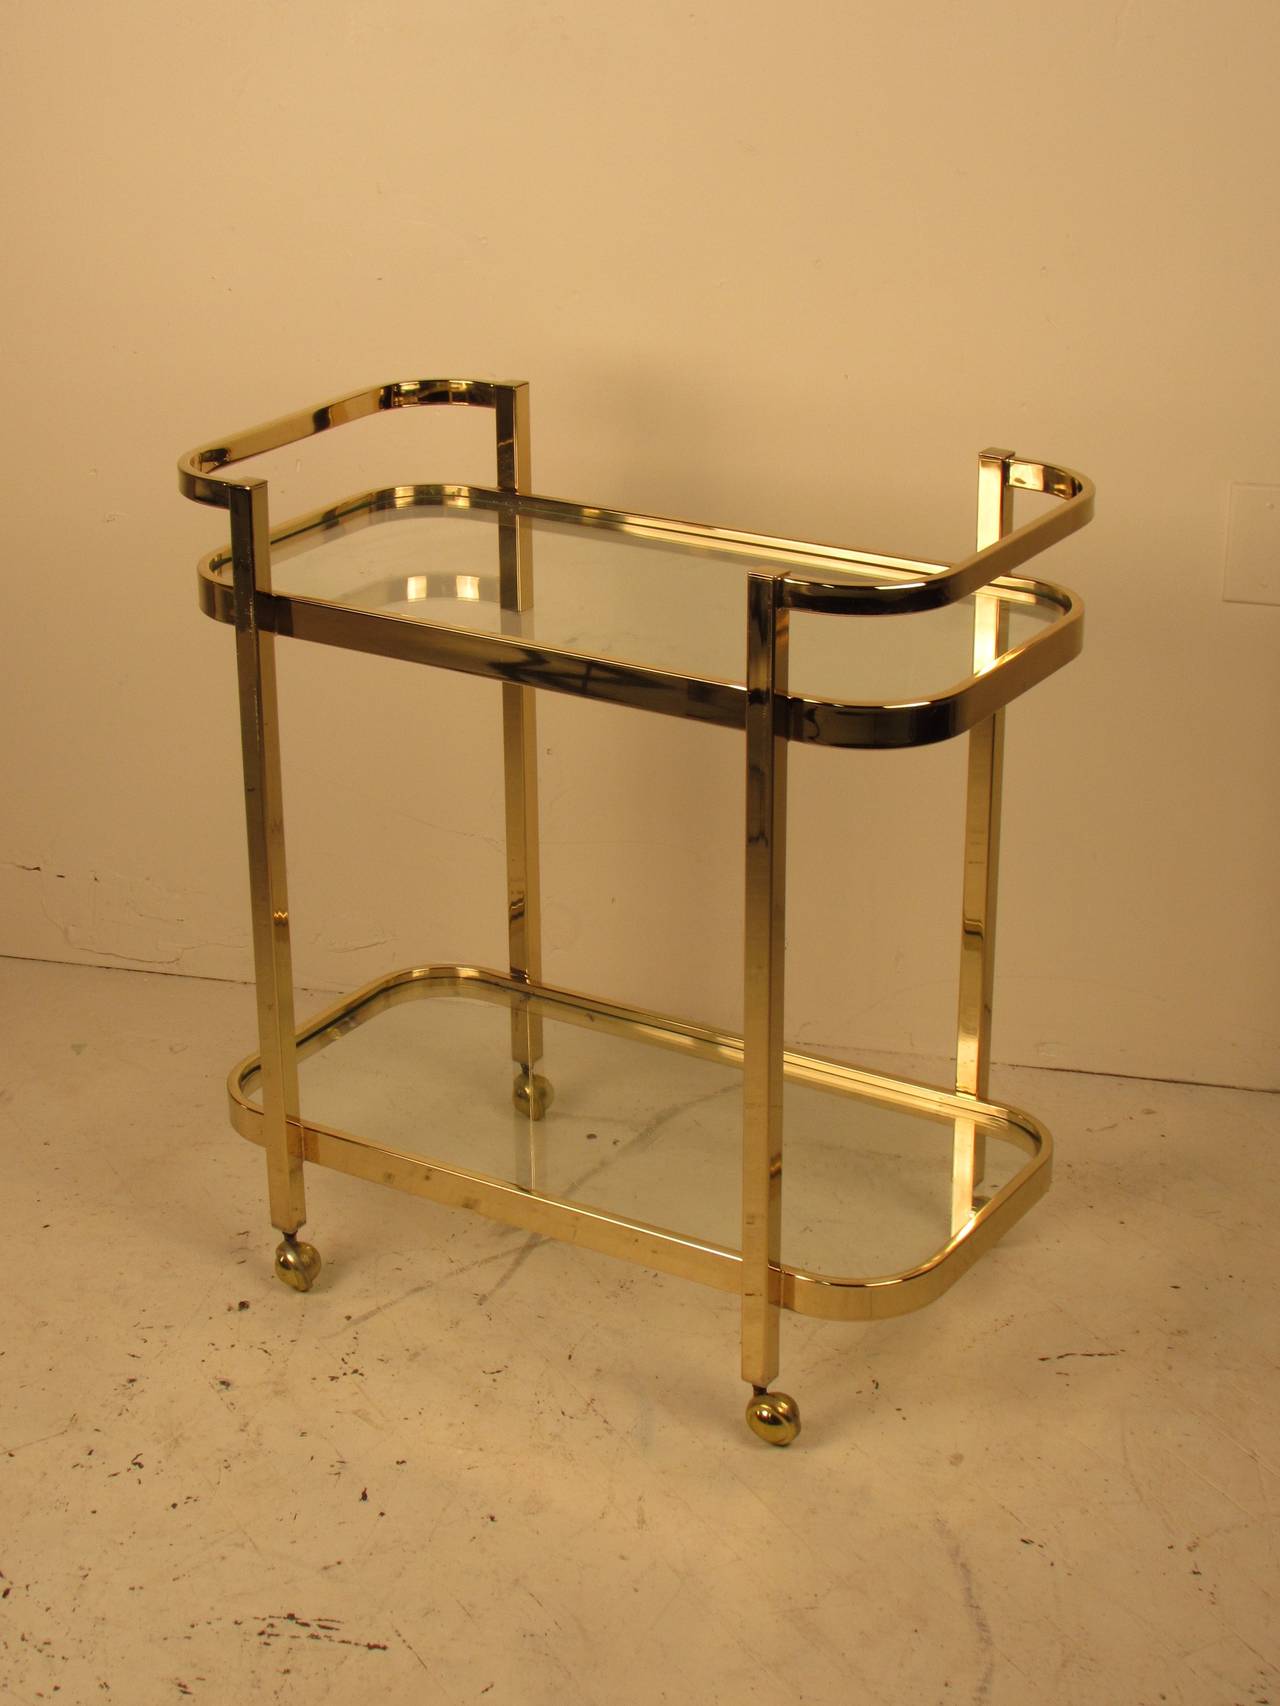 Classic brass and glass bar cart by Milo Baughman for Thayer Coggin. Sleek styling and solid welded construction. Impeccable quality, weight and craftsmanship! 

Brass and glass are both in overall good vintage condition. There are a few worn